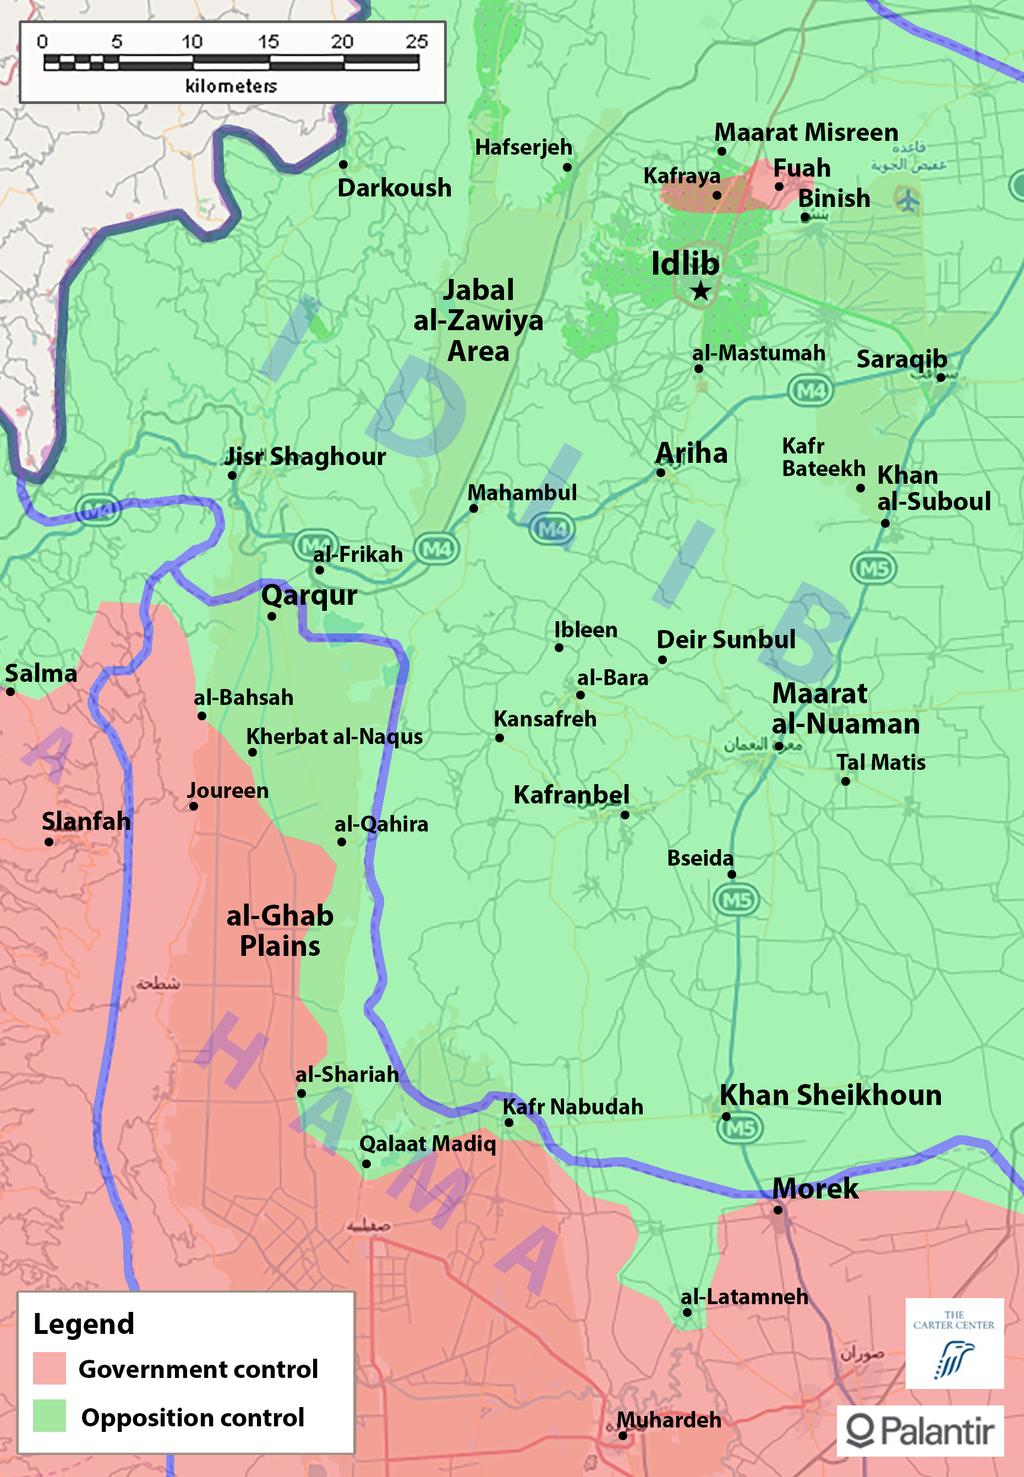 The Carter Center Syria Frontlines Update, October 9, 2015 Northwestern Syria Northwestern Syria, including the governorates of Aleppo, Idlib, Hama, Latakia, and Tartous, continues to encompass the